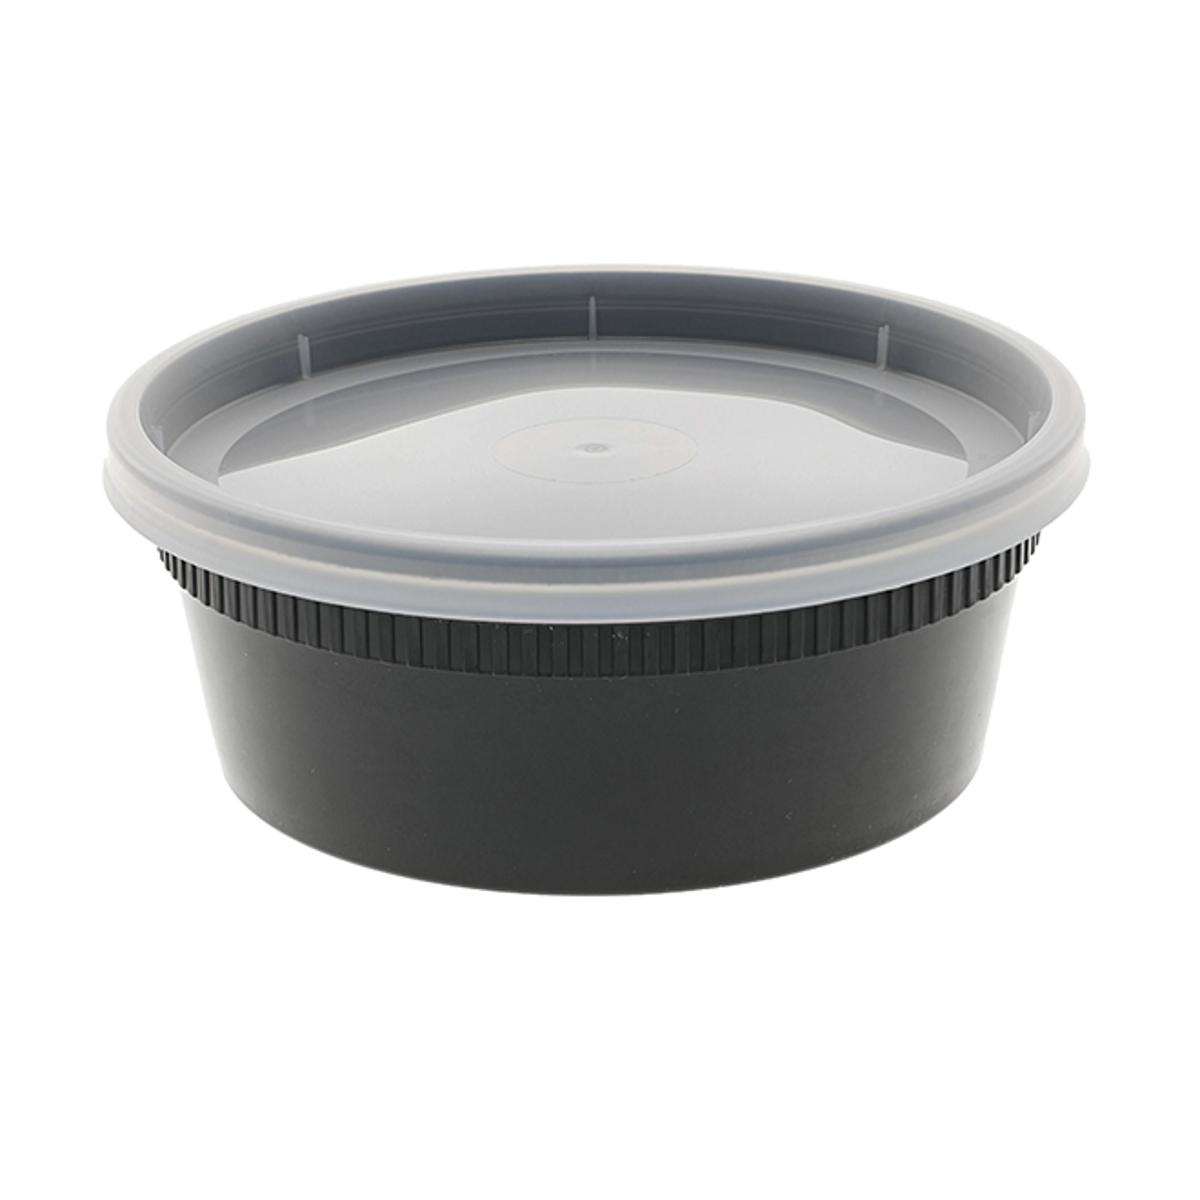 Member's Mark Deli Container with Lid (8 oz. 240 Ct.)